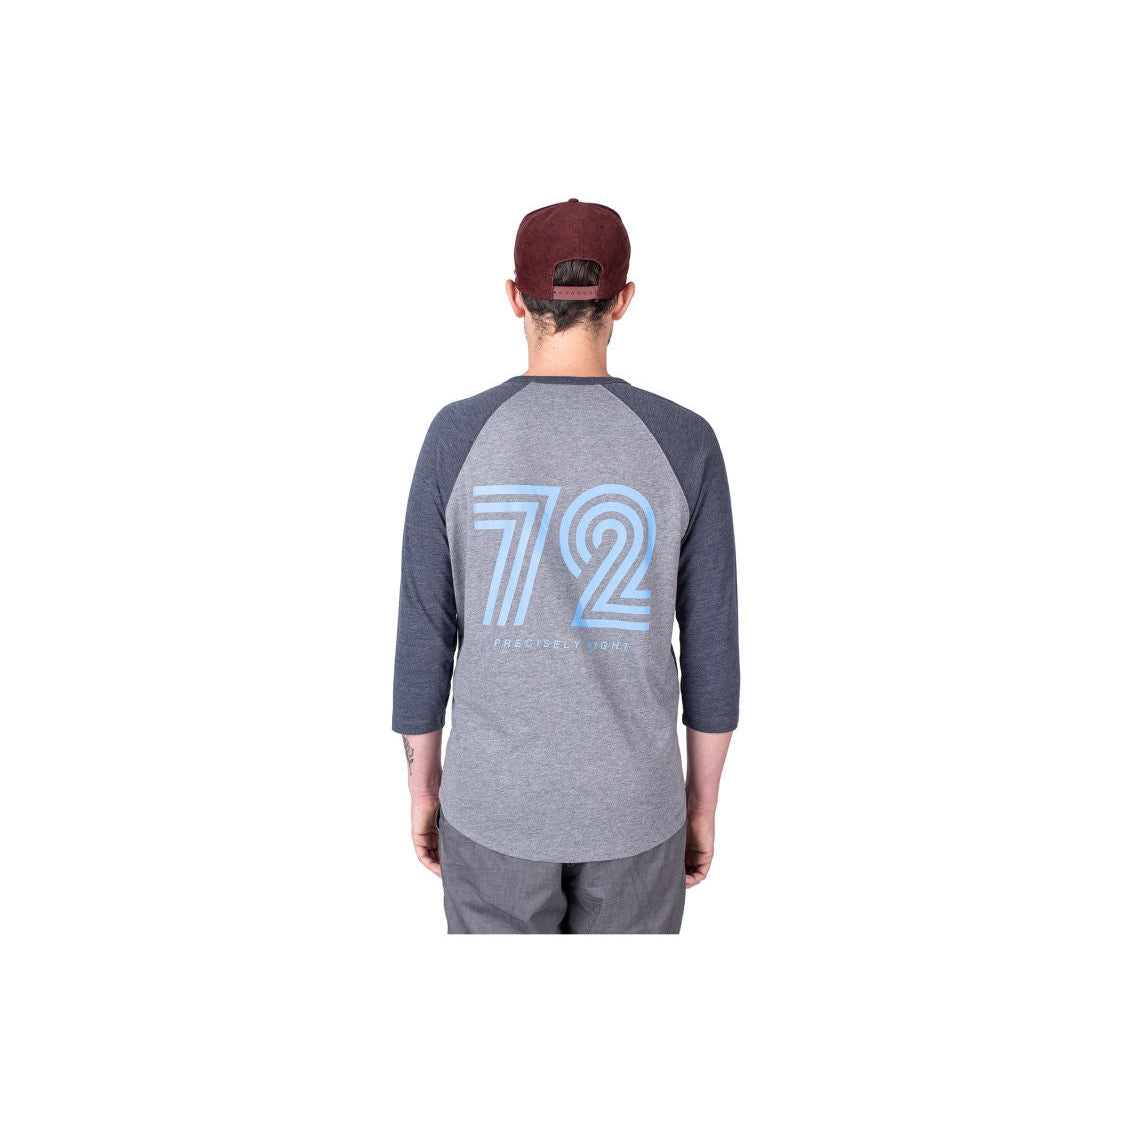 Giant Vintage '72 T-Shirt - Jerseys - Bicycle Warehouse